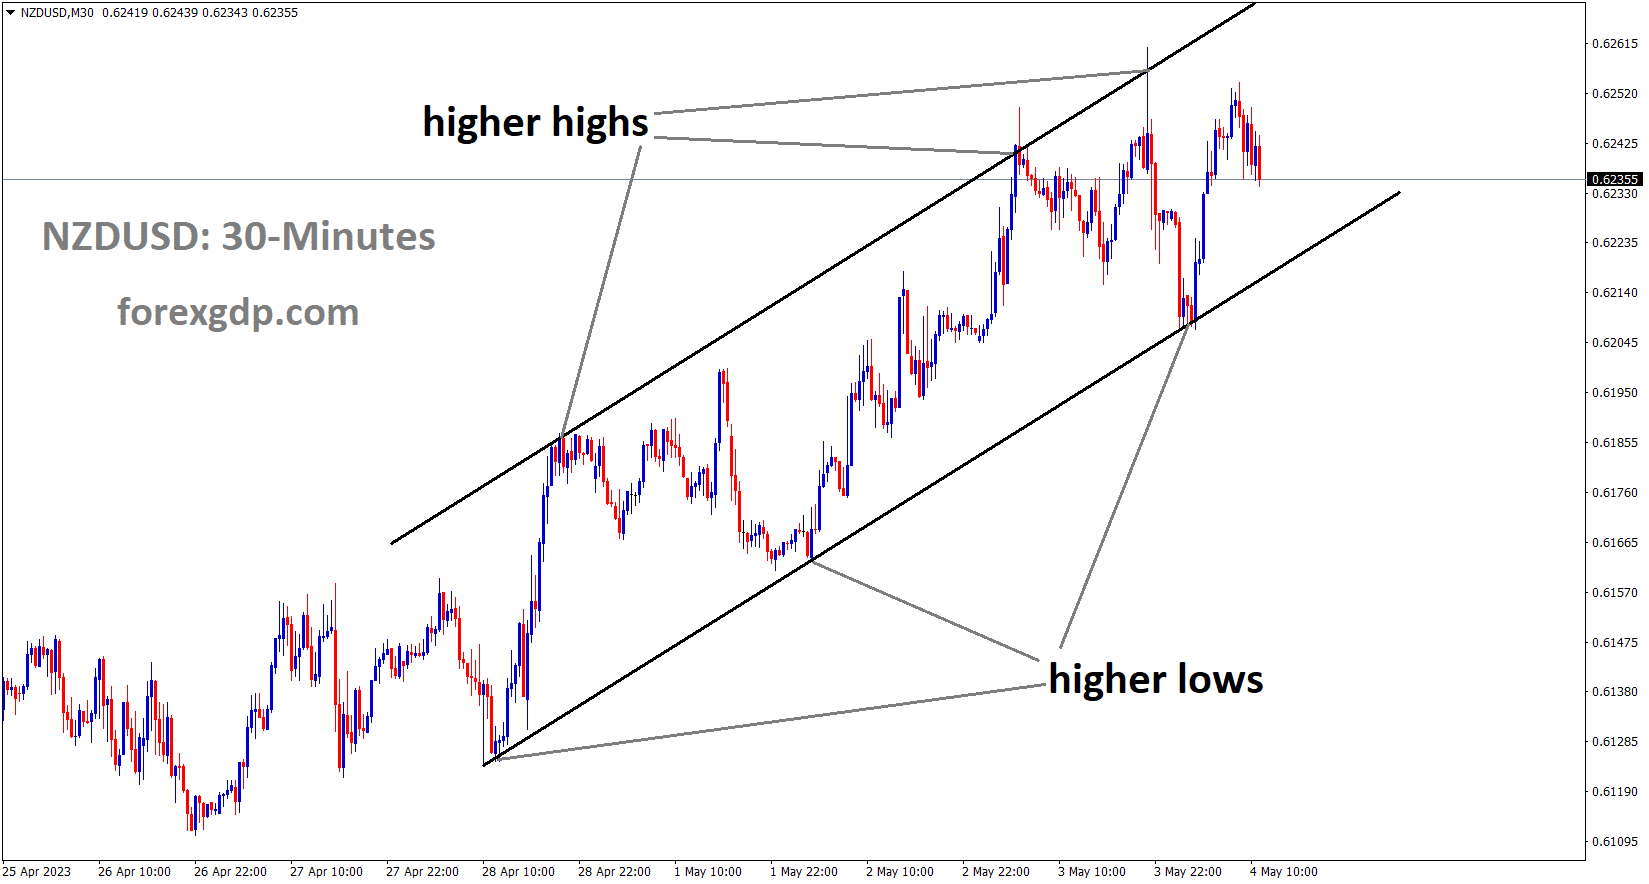 NZDUSD is moving in an Ascending channel and the market has fallen from the higher high area of the channel